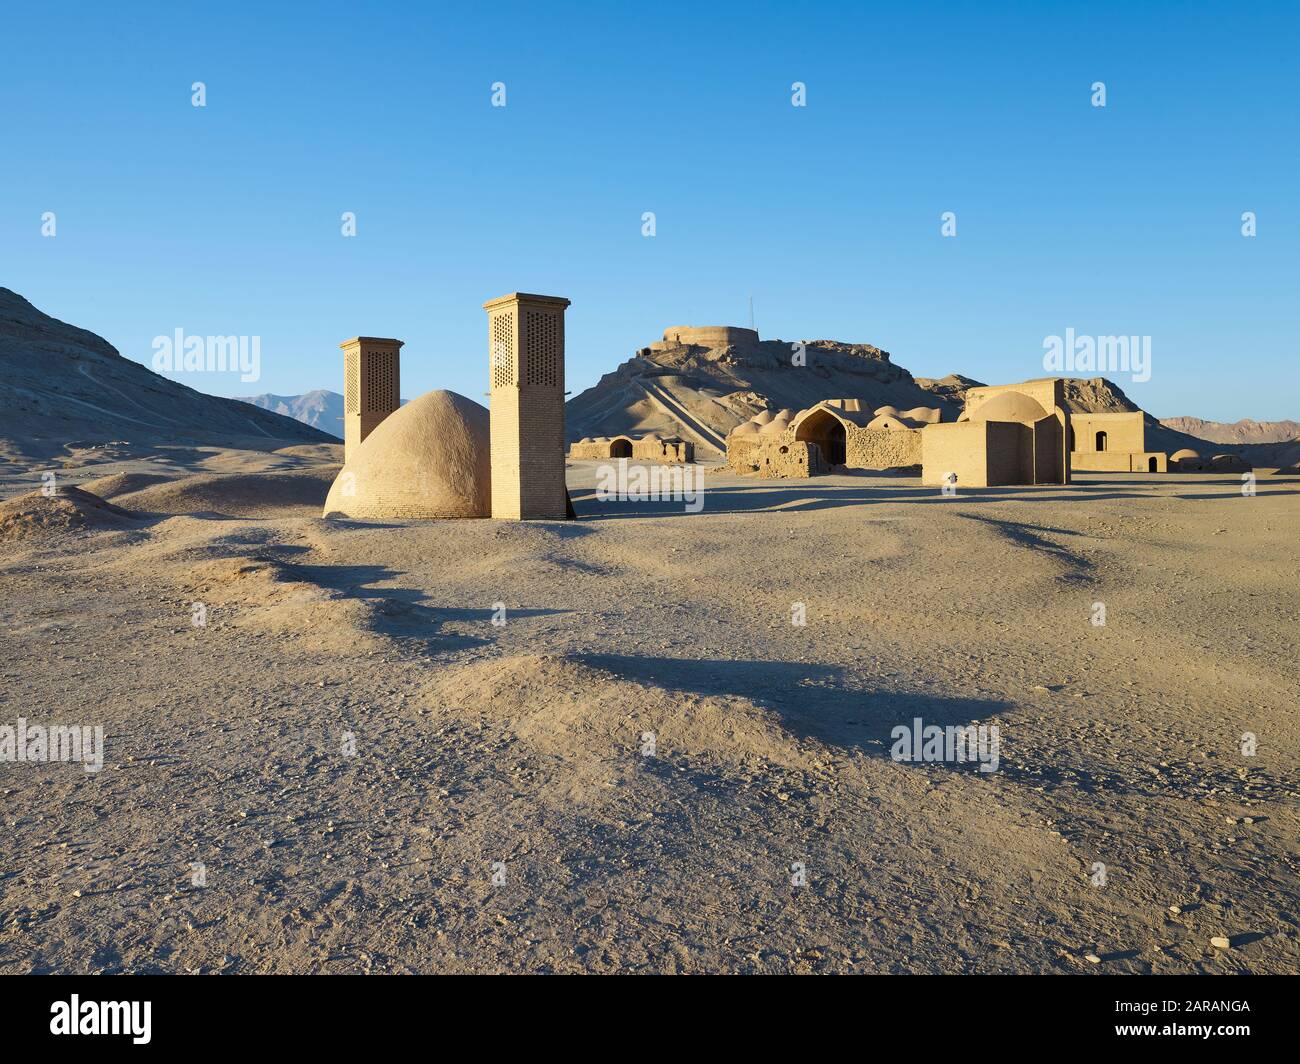 Silence towers on the outskirts of the desert city of Yazd in Iran, taken on November 17, 2017. Zarathustrians who had died until 1960 were kept here, so that the vultures cleaned the bones of the meat. The bones were then collected in the center of the towers. Yazd is one of the oldest cities in Iran with a population of around 650,000 people. The old town was declared a UNESCO World Heritage Site in 2017. | usage worldwide Stock Photo